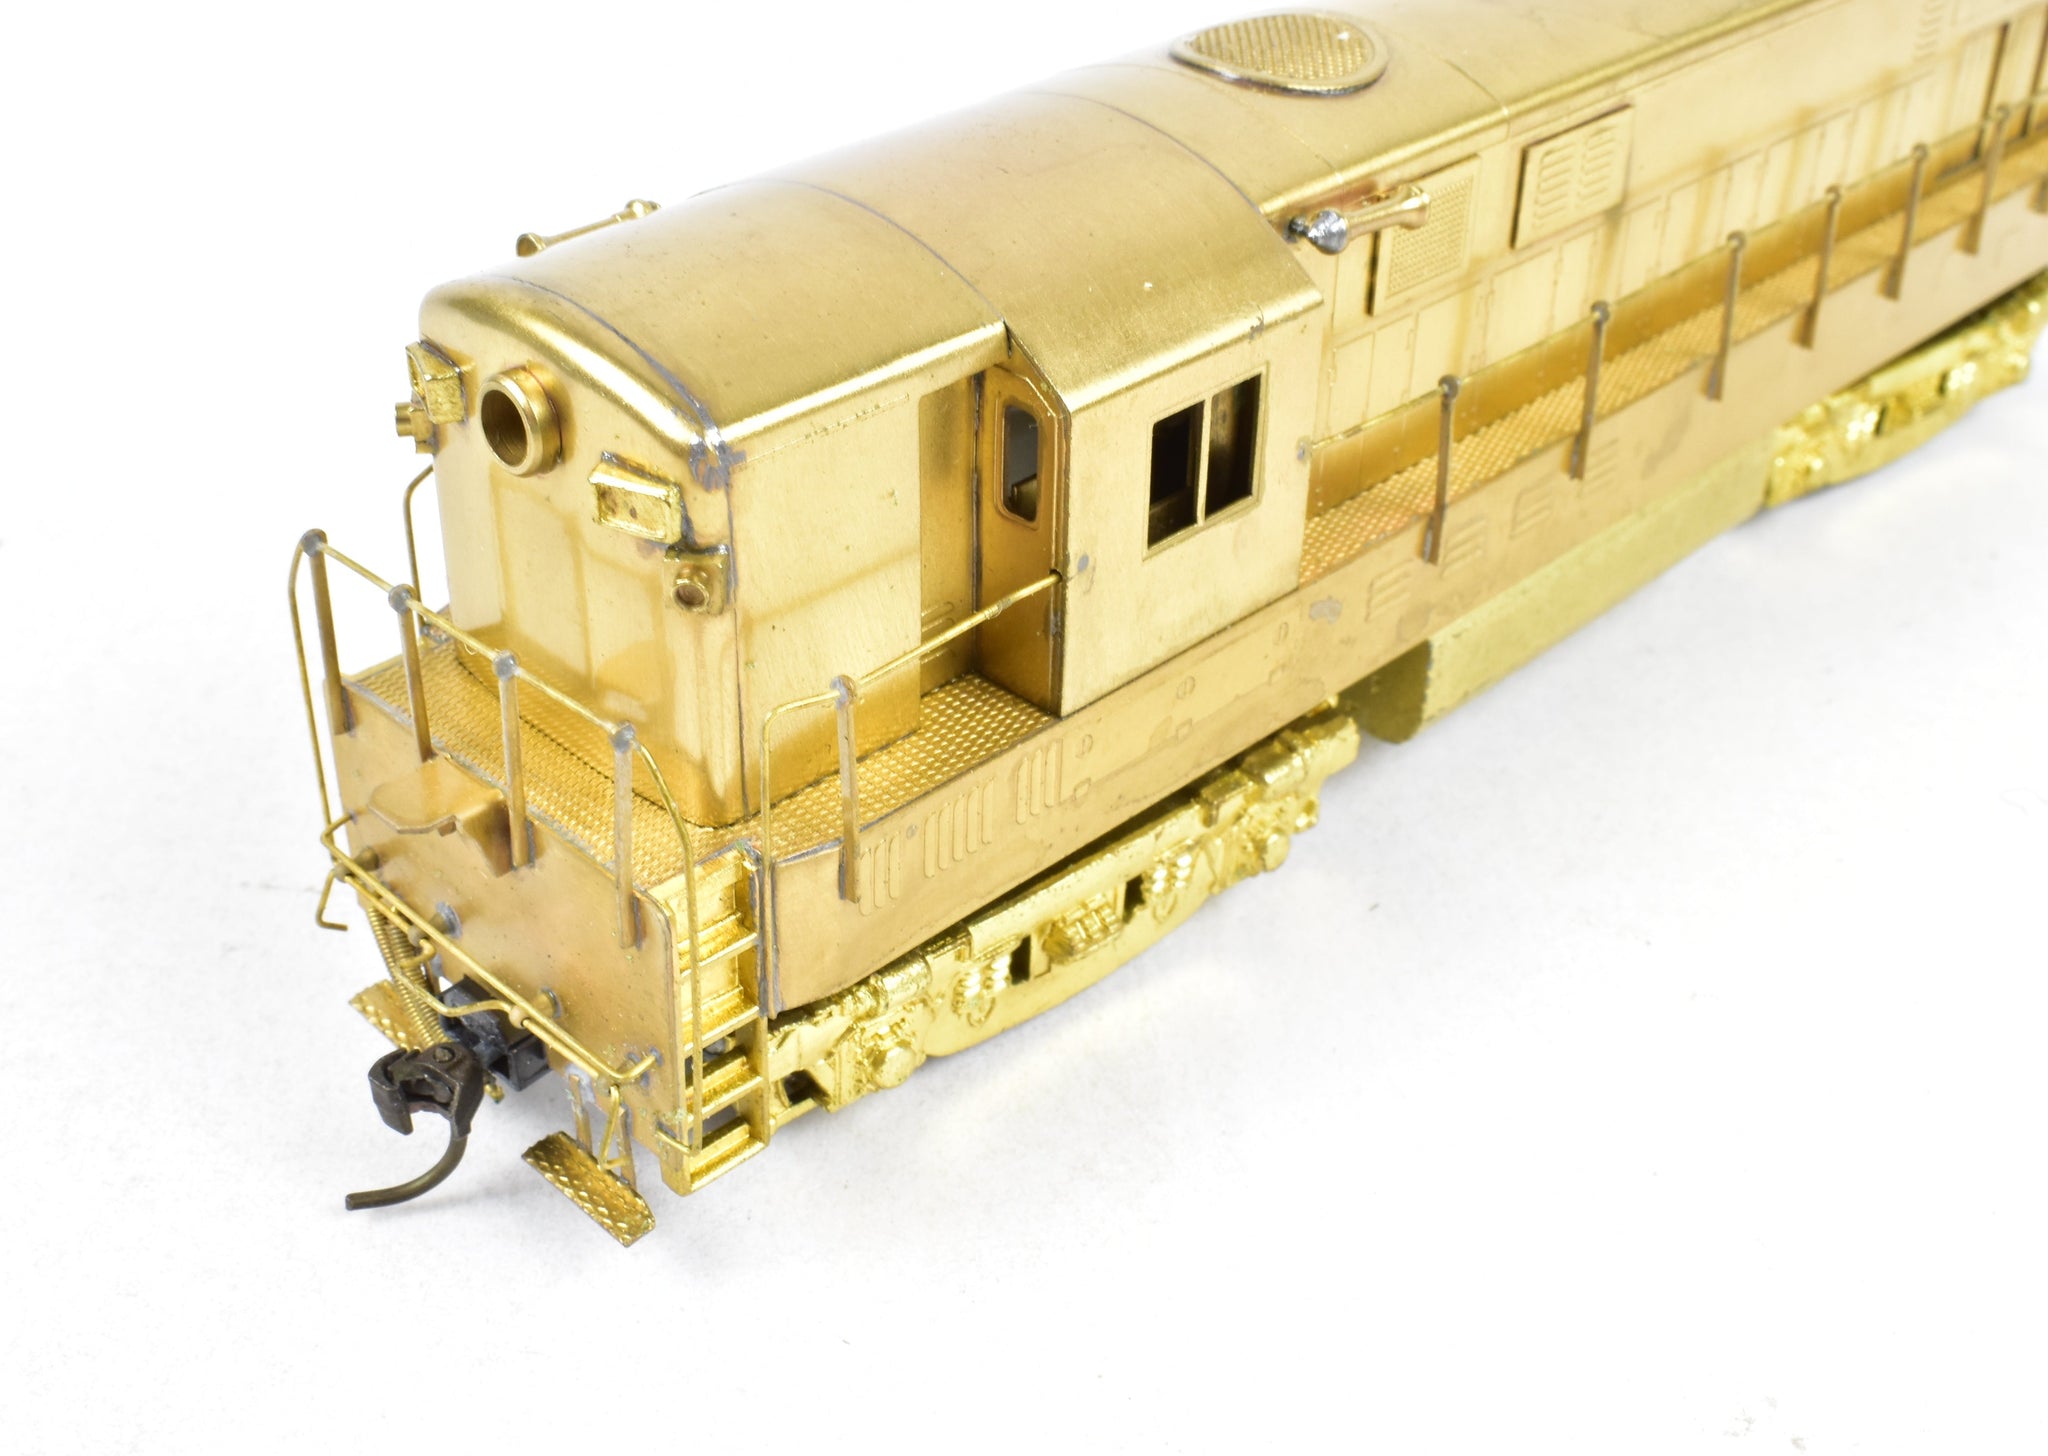 Red Ball Brass Models Fairbanks Morse C Liner A Unit Diesel Ho Scale